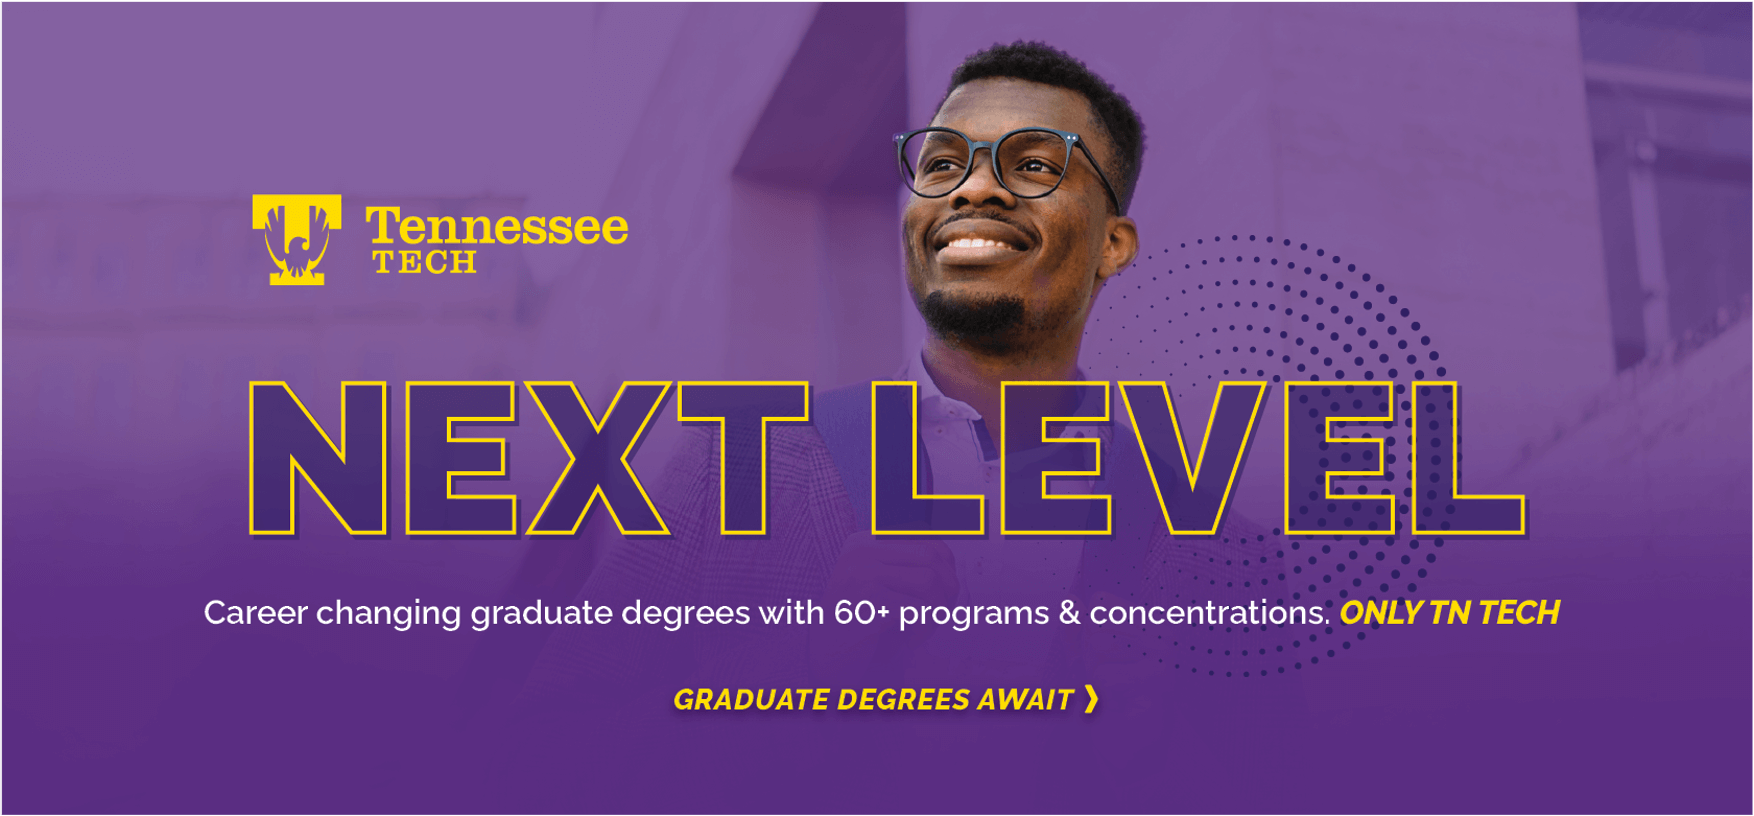 Tennessee Tech - Next Level - Career changing graduate degrees with 60+ programs and concentrations. Only TN Tech.